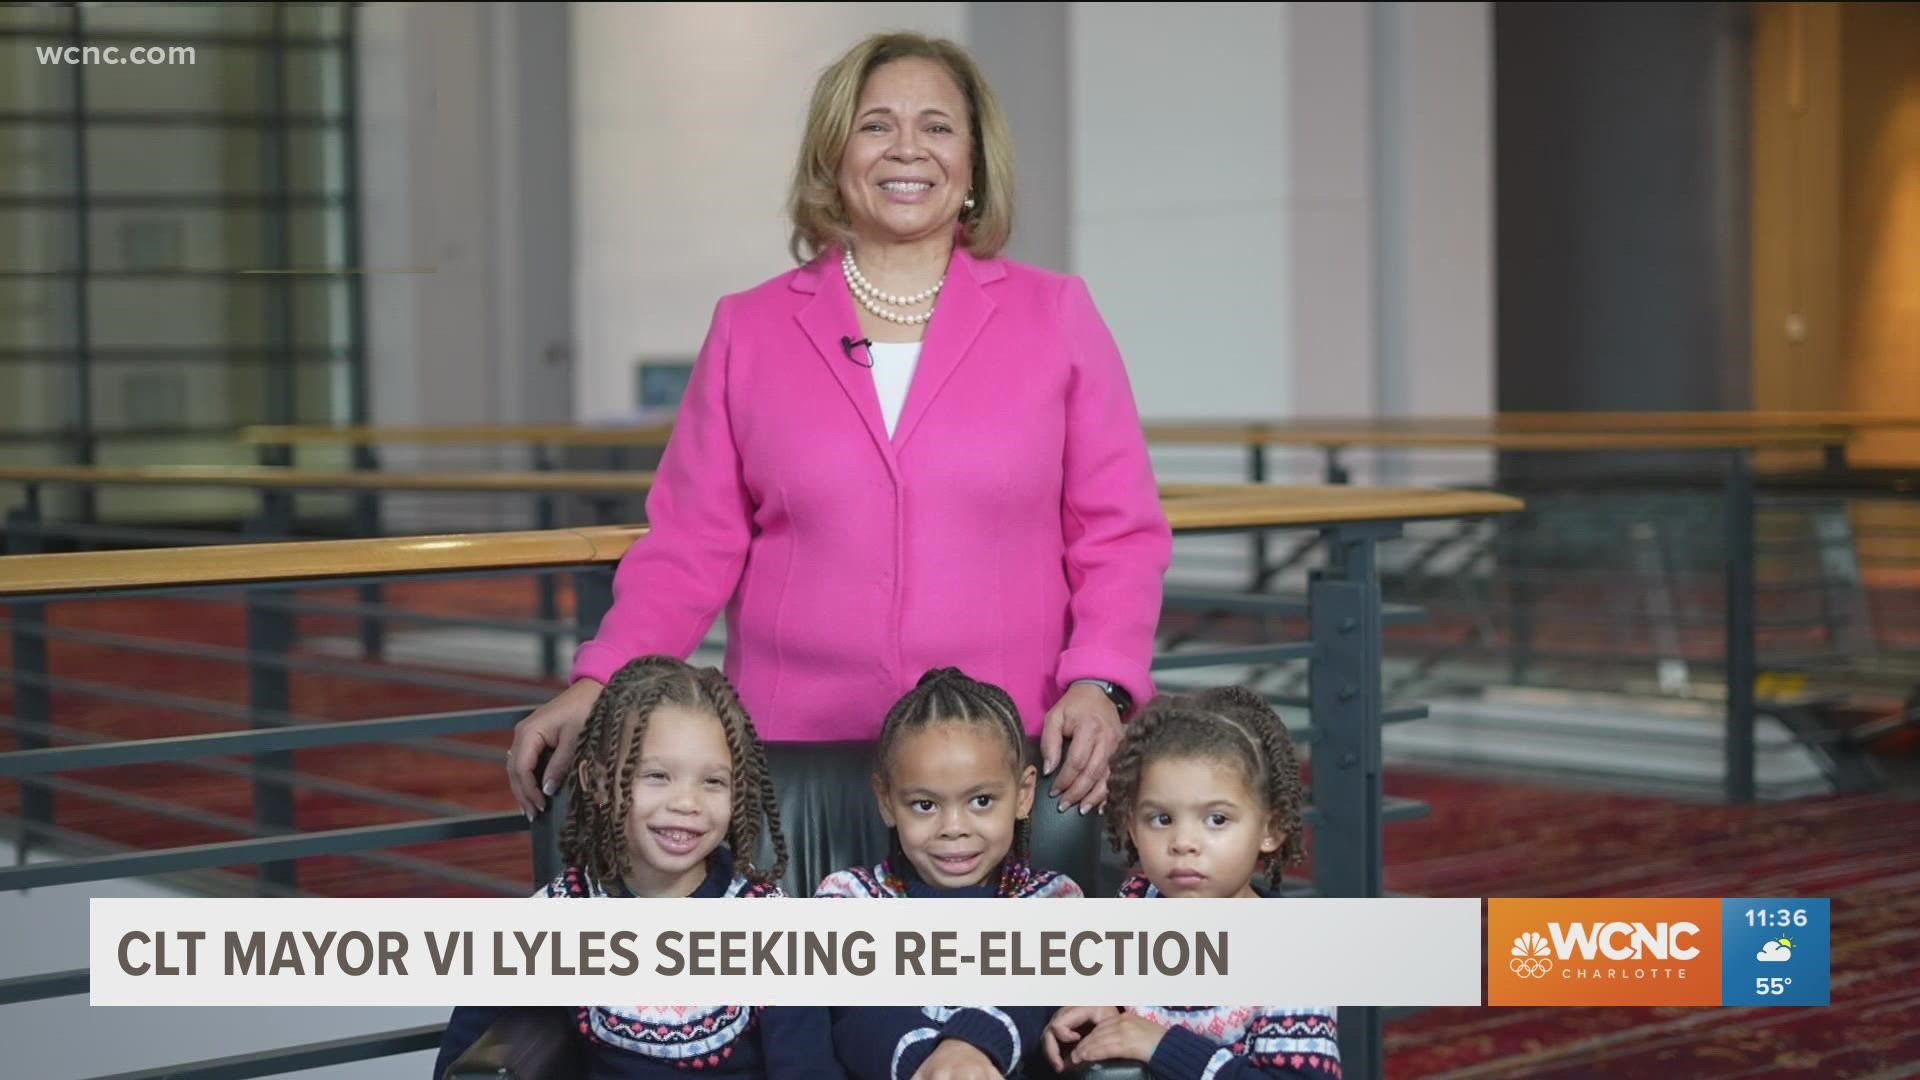 Charlotte Mayor Vi Lyles announced in a Thanksgiving Day video she would seek reelection in 2022.